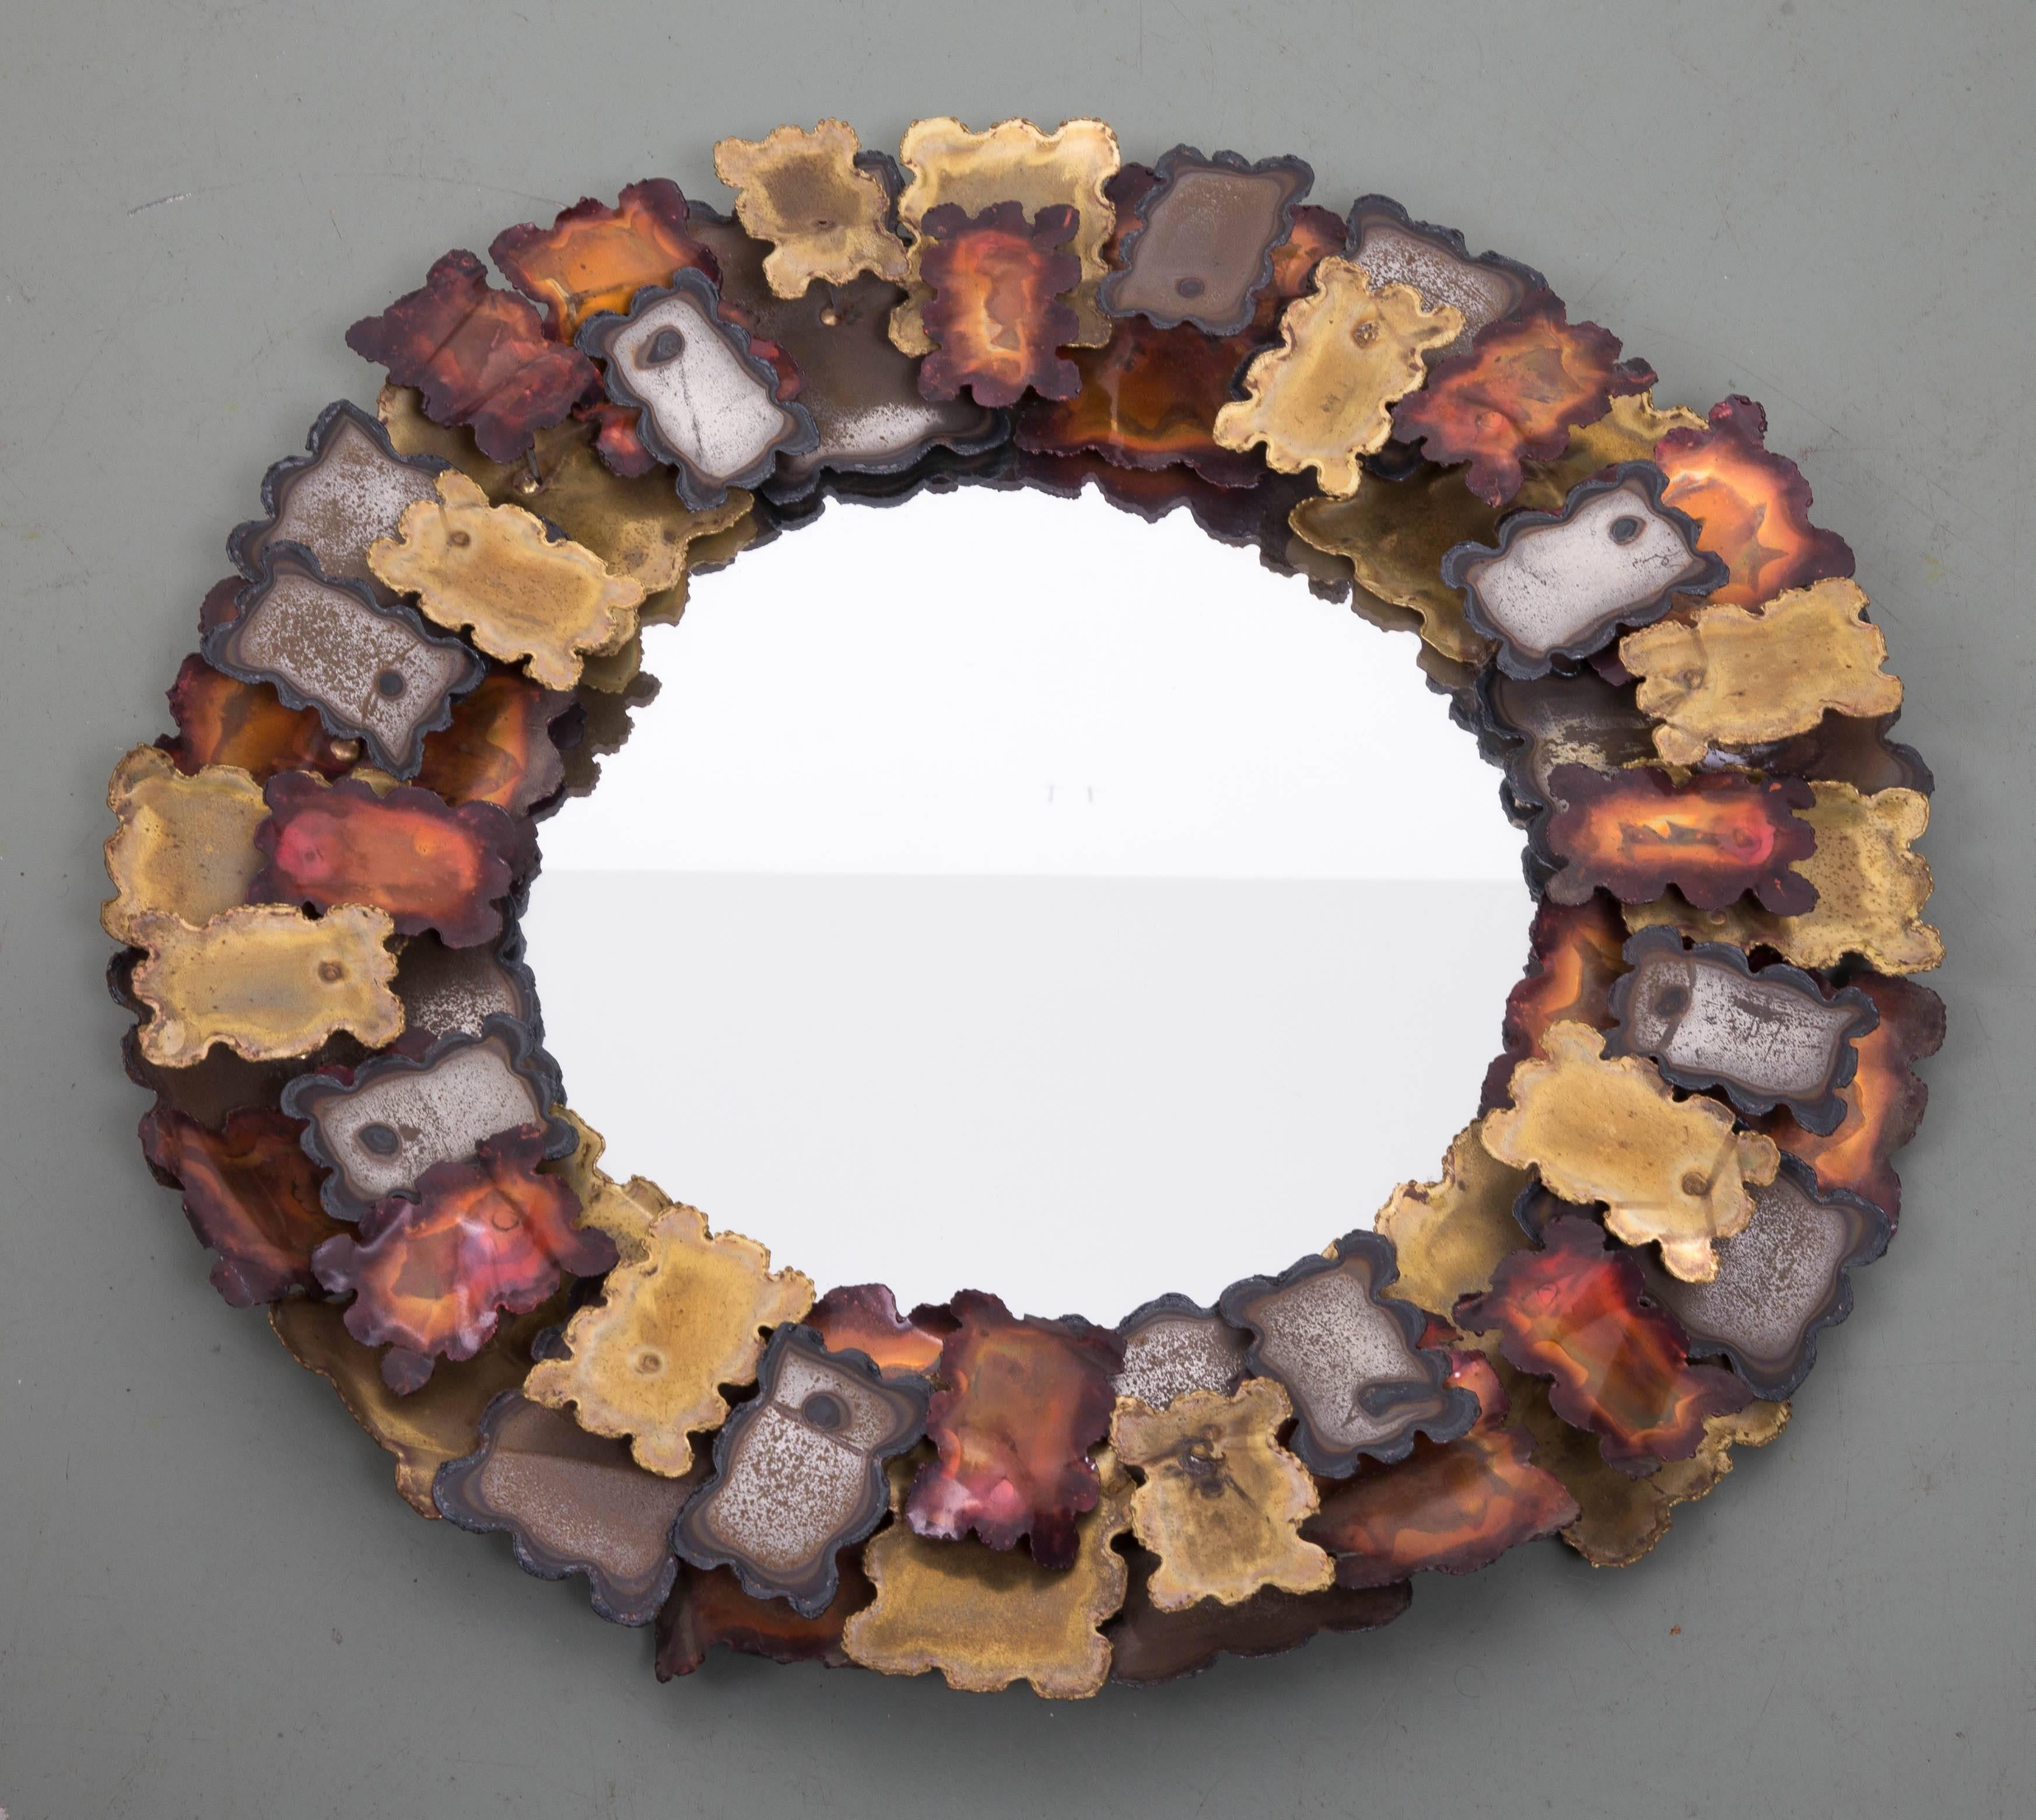 Patinated mixed metals forming two tiers around circular mirror.